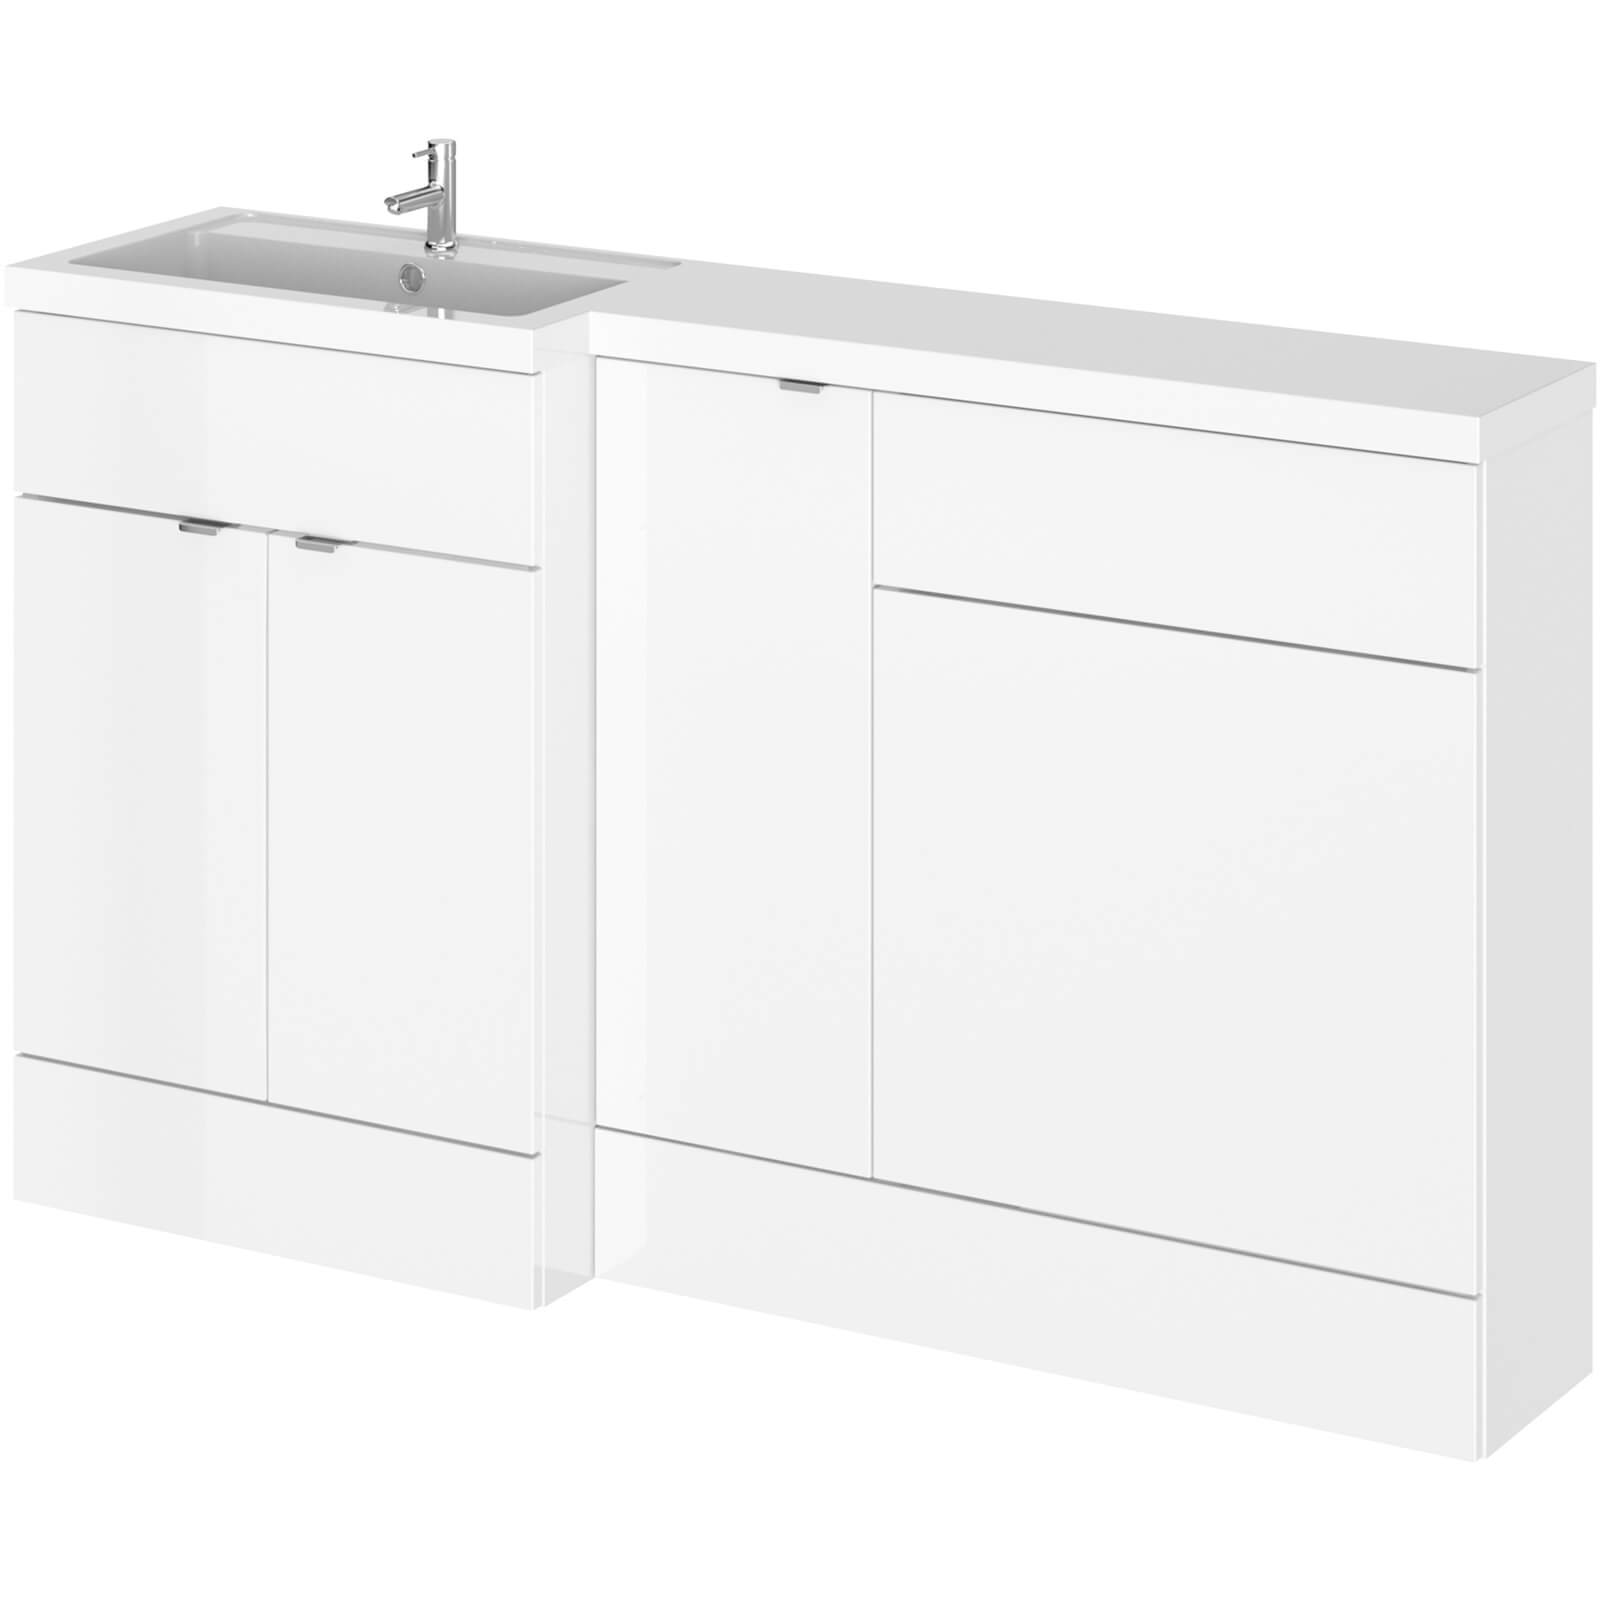 Photo of Balterley Dynamic 1500mm Left Hand Wc Combination Unit - Gloss White